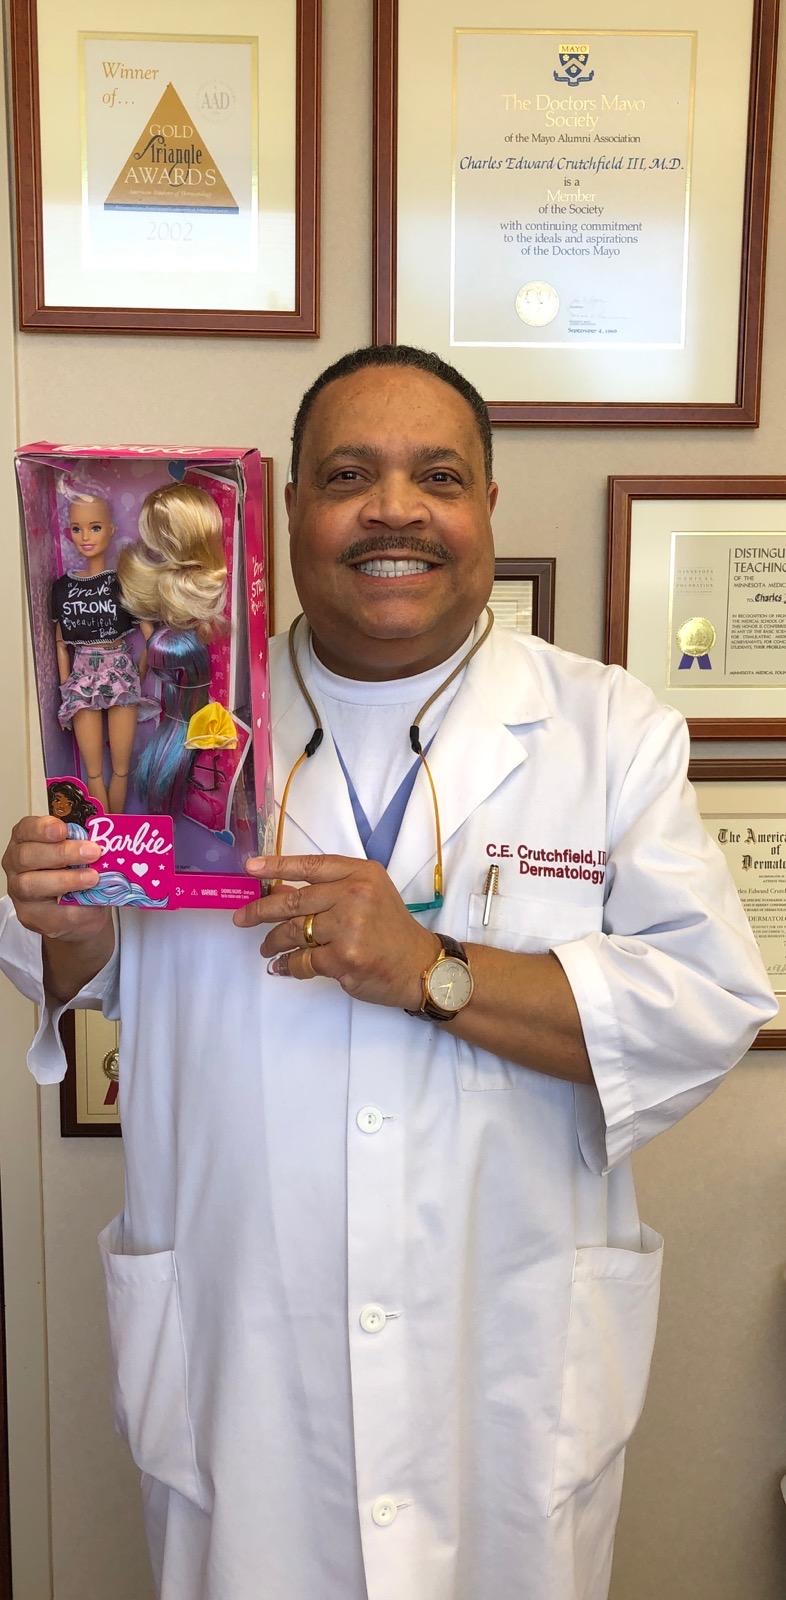 Charles E. Crutchfield III, M.D. with his Fashionista Barbie Doll with alopecia.